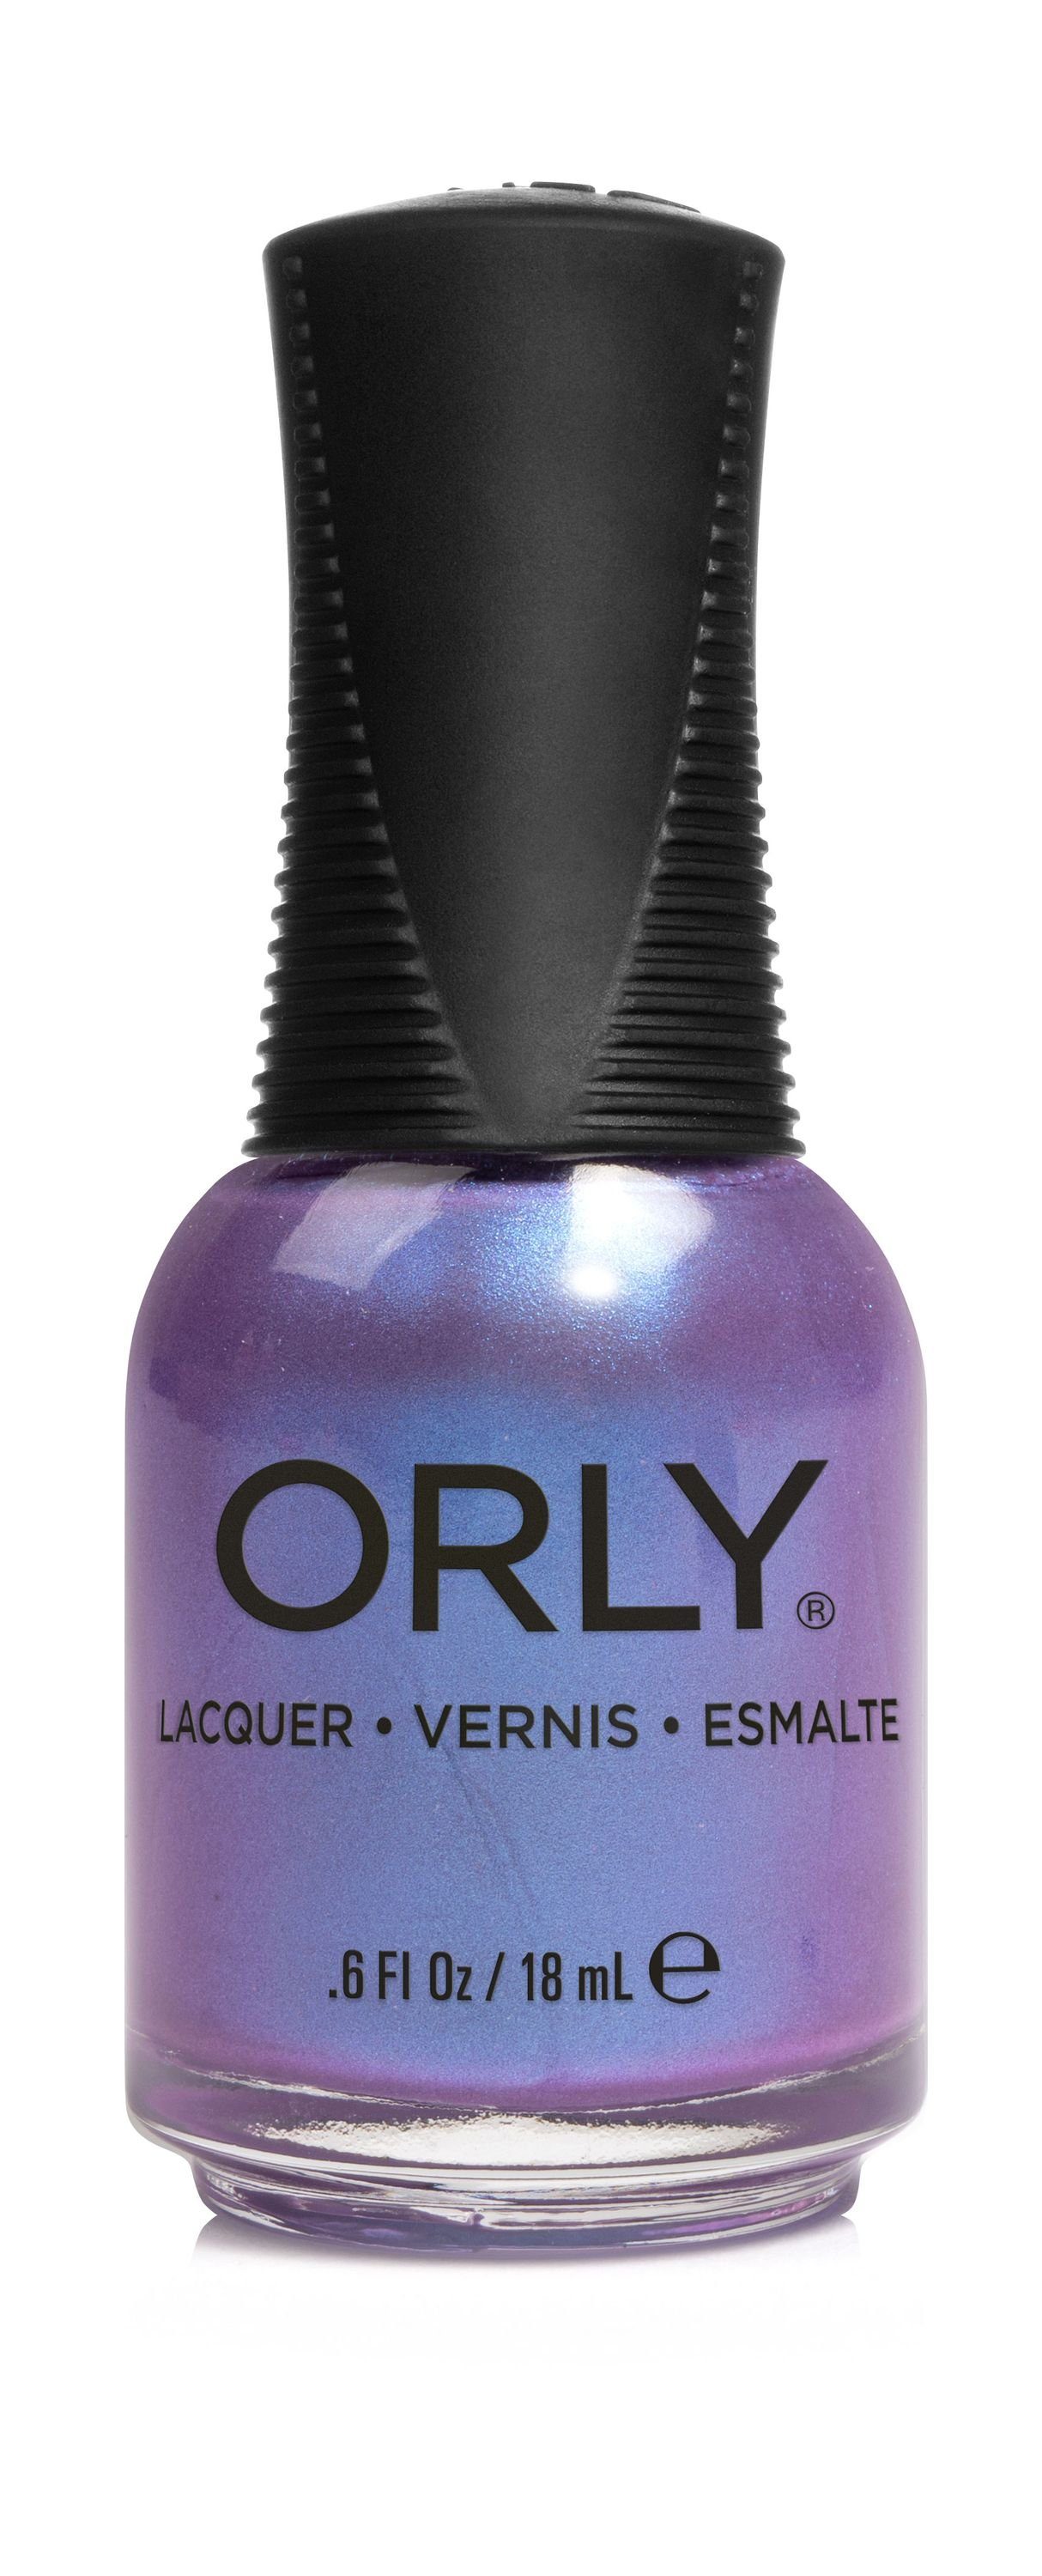 ORLY Nagellack Attract Opposites Nagellack